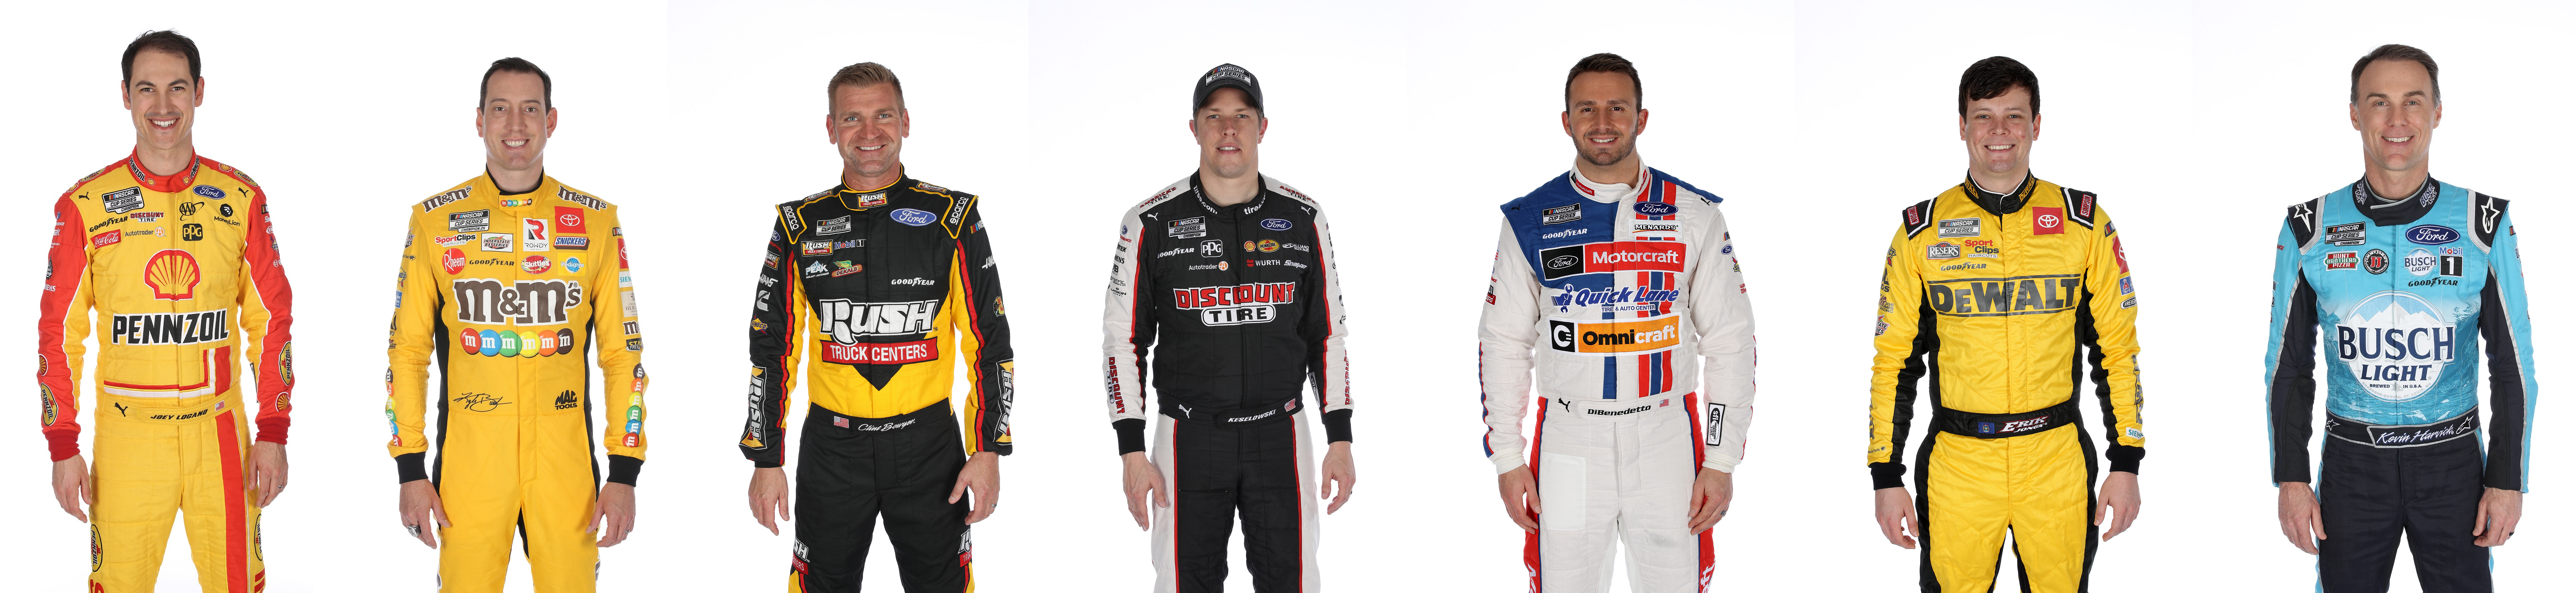 Now, here's our picks for today's Supermarket Heroes 500 at Bristol!